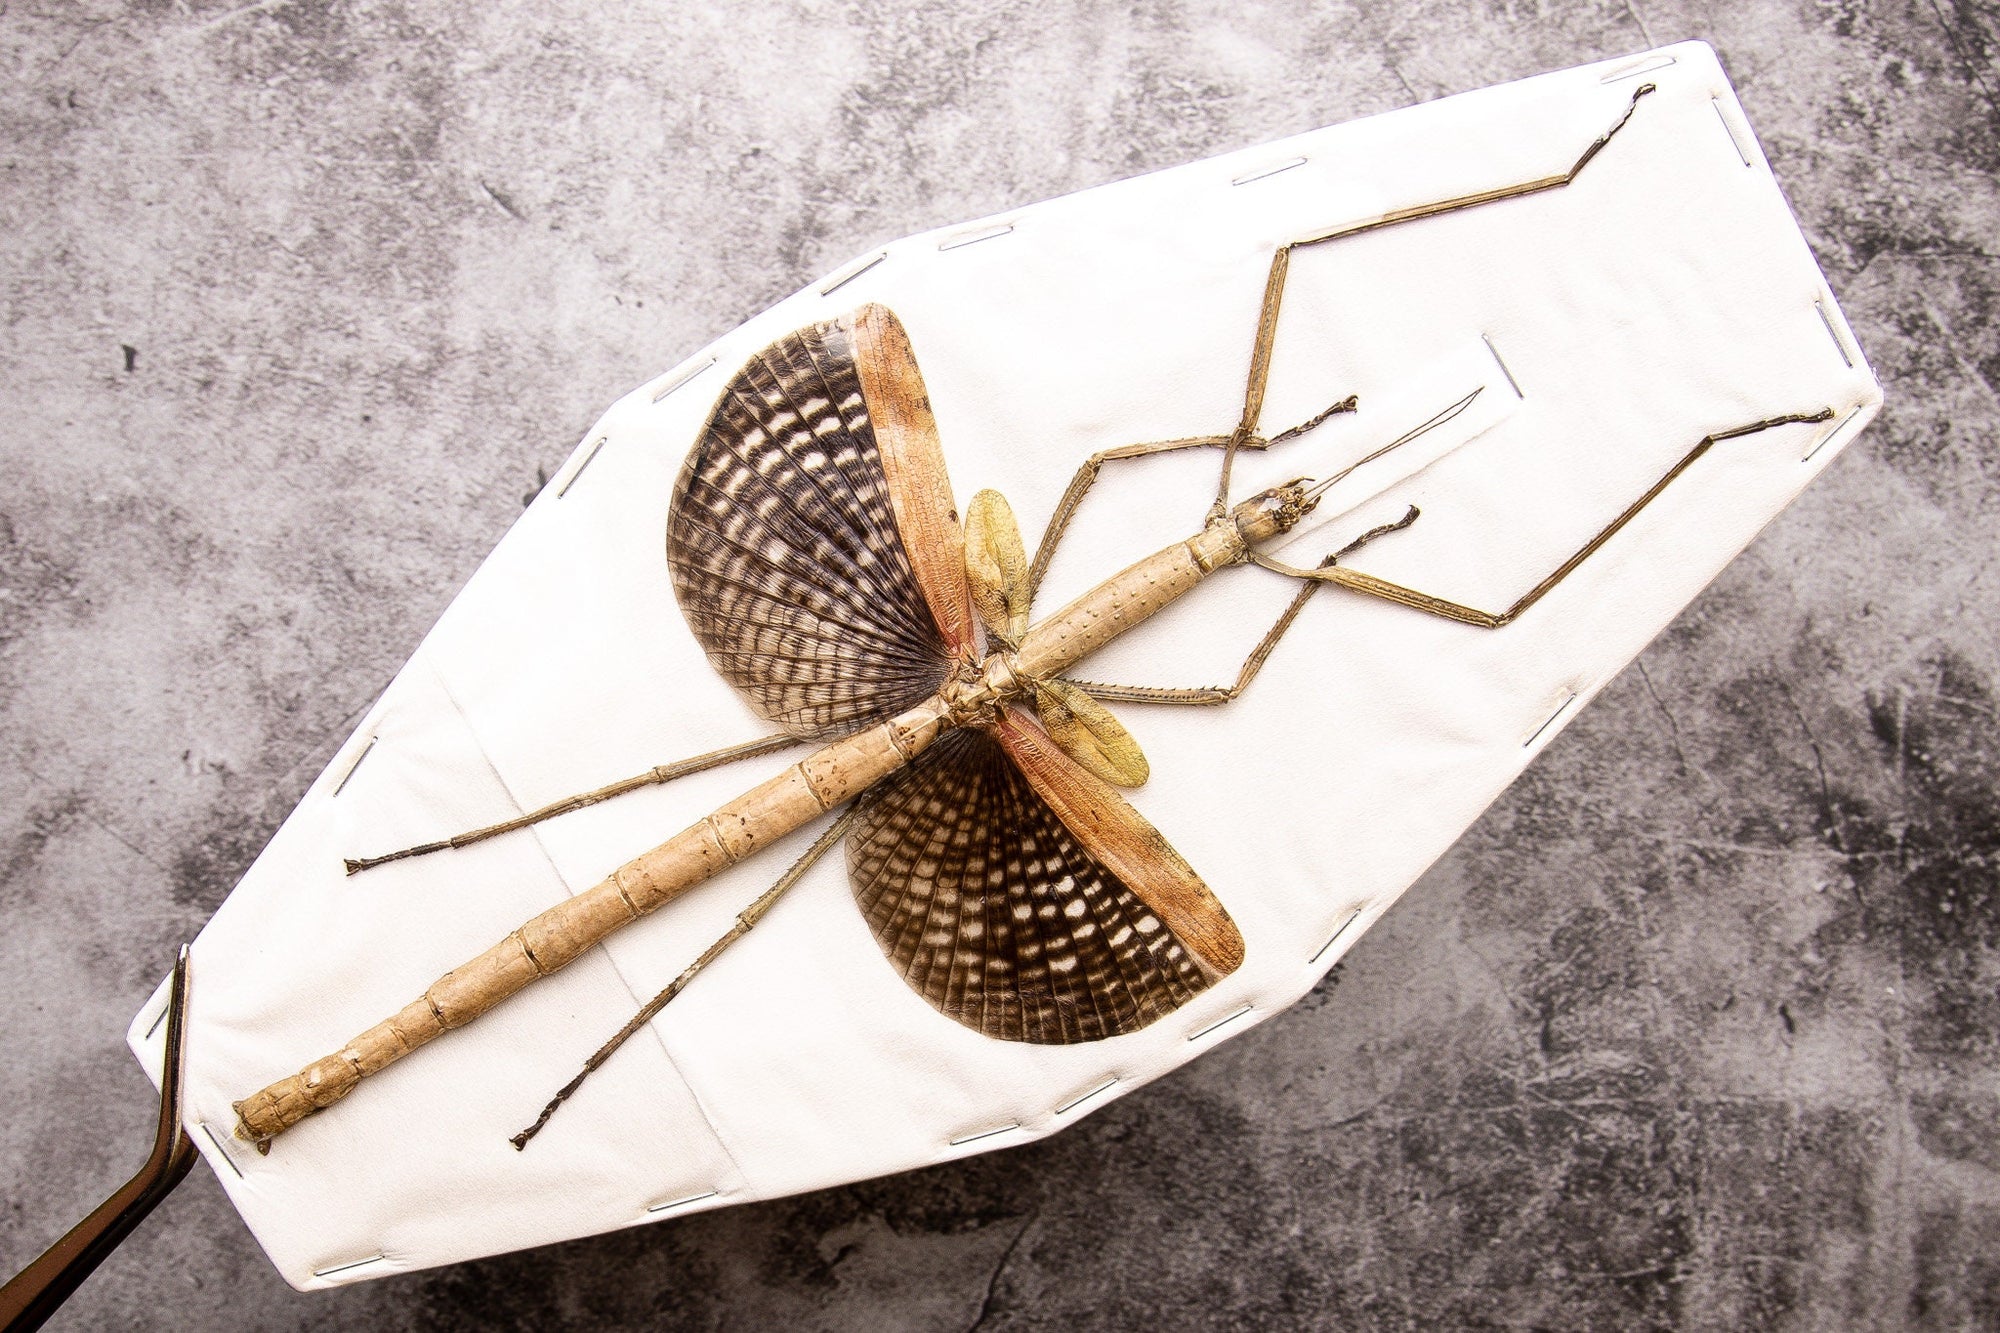 Buru Giant Stick Insect (Anchiale buruense) 17cm+ A1 Real Entomology Taxidermy Specimen from Indonesia